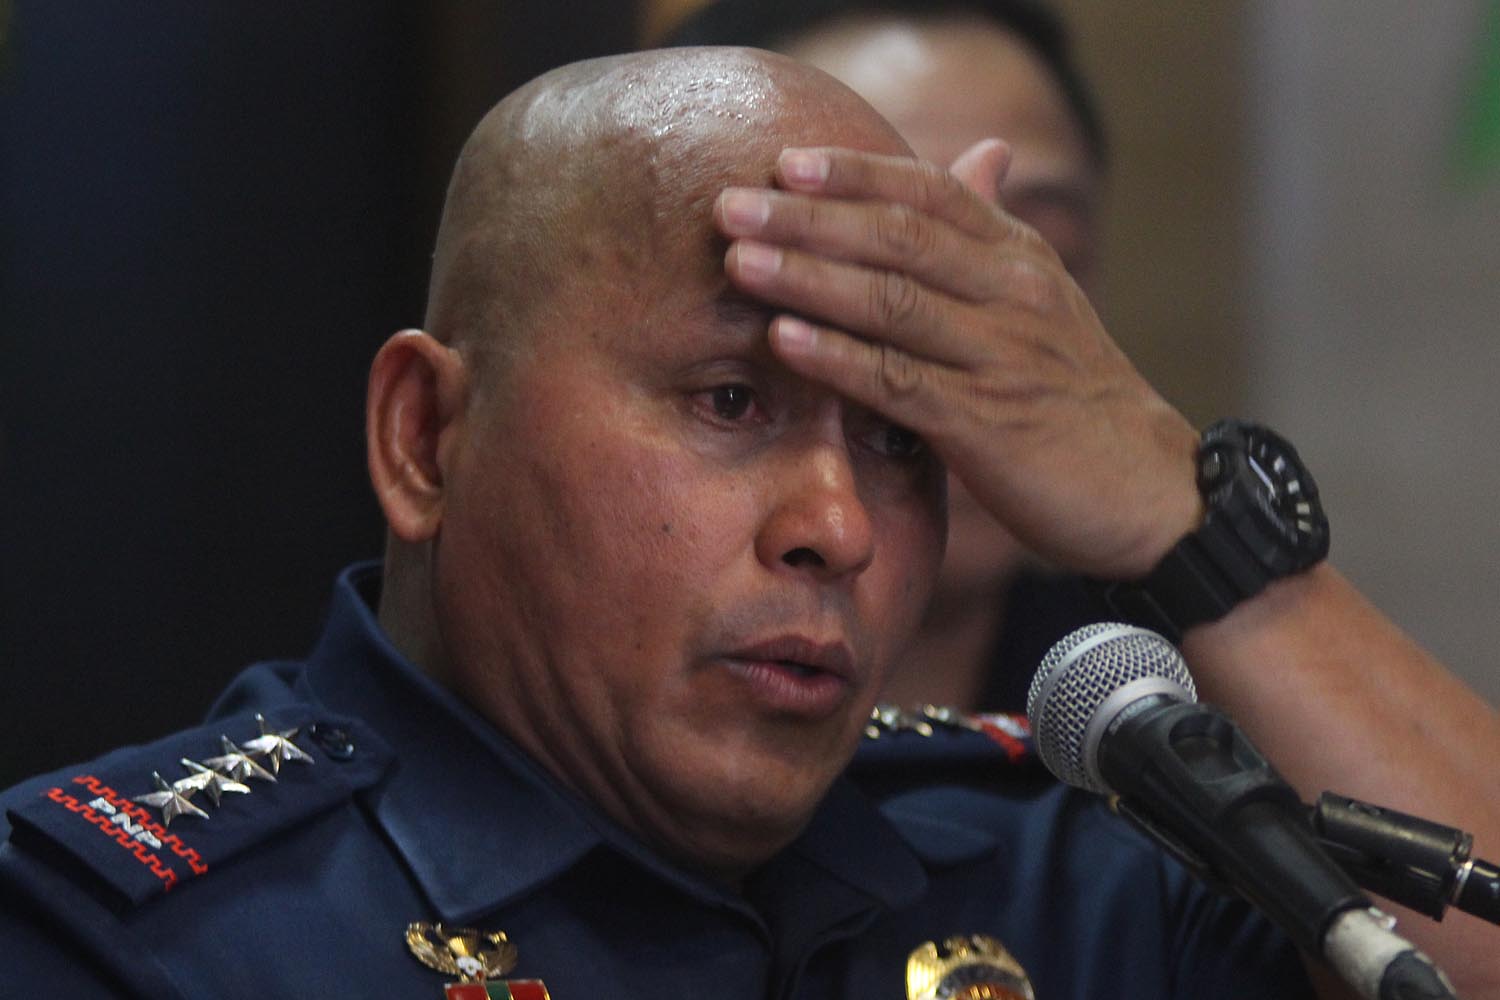 HIGH DEATH TOLL. Human Rights Watch says outgoing PNP chief Ronald dela Rosa leaves an unmatched death toll record post-Marcos. File photo by DARREN LANGIT 